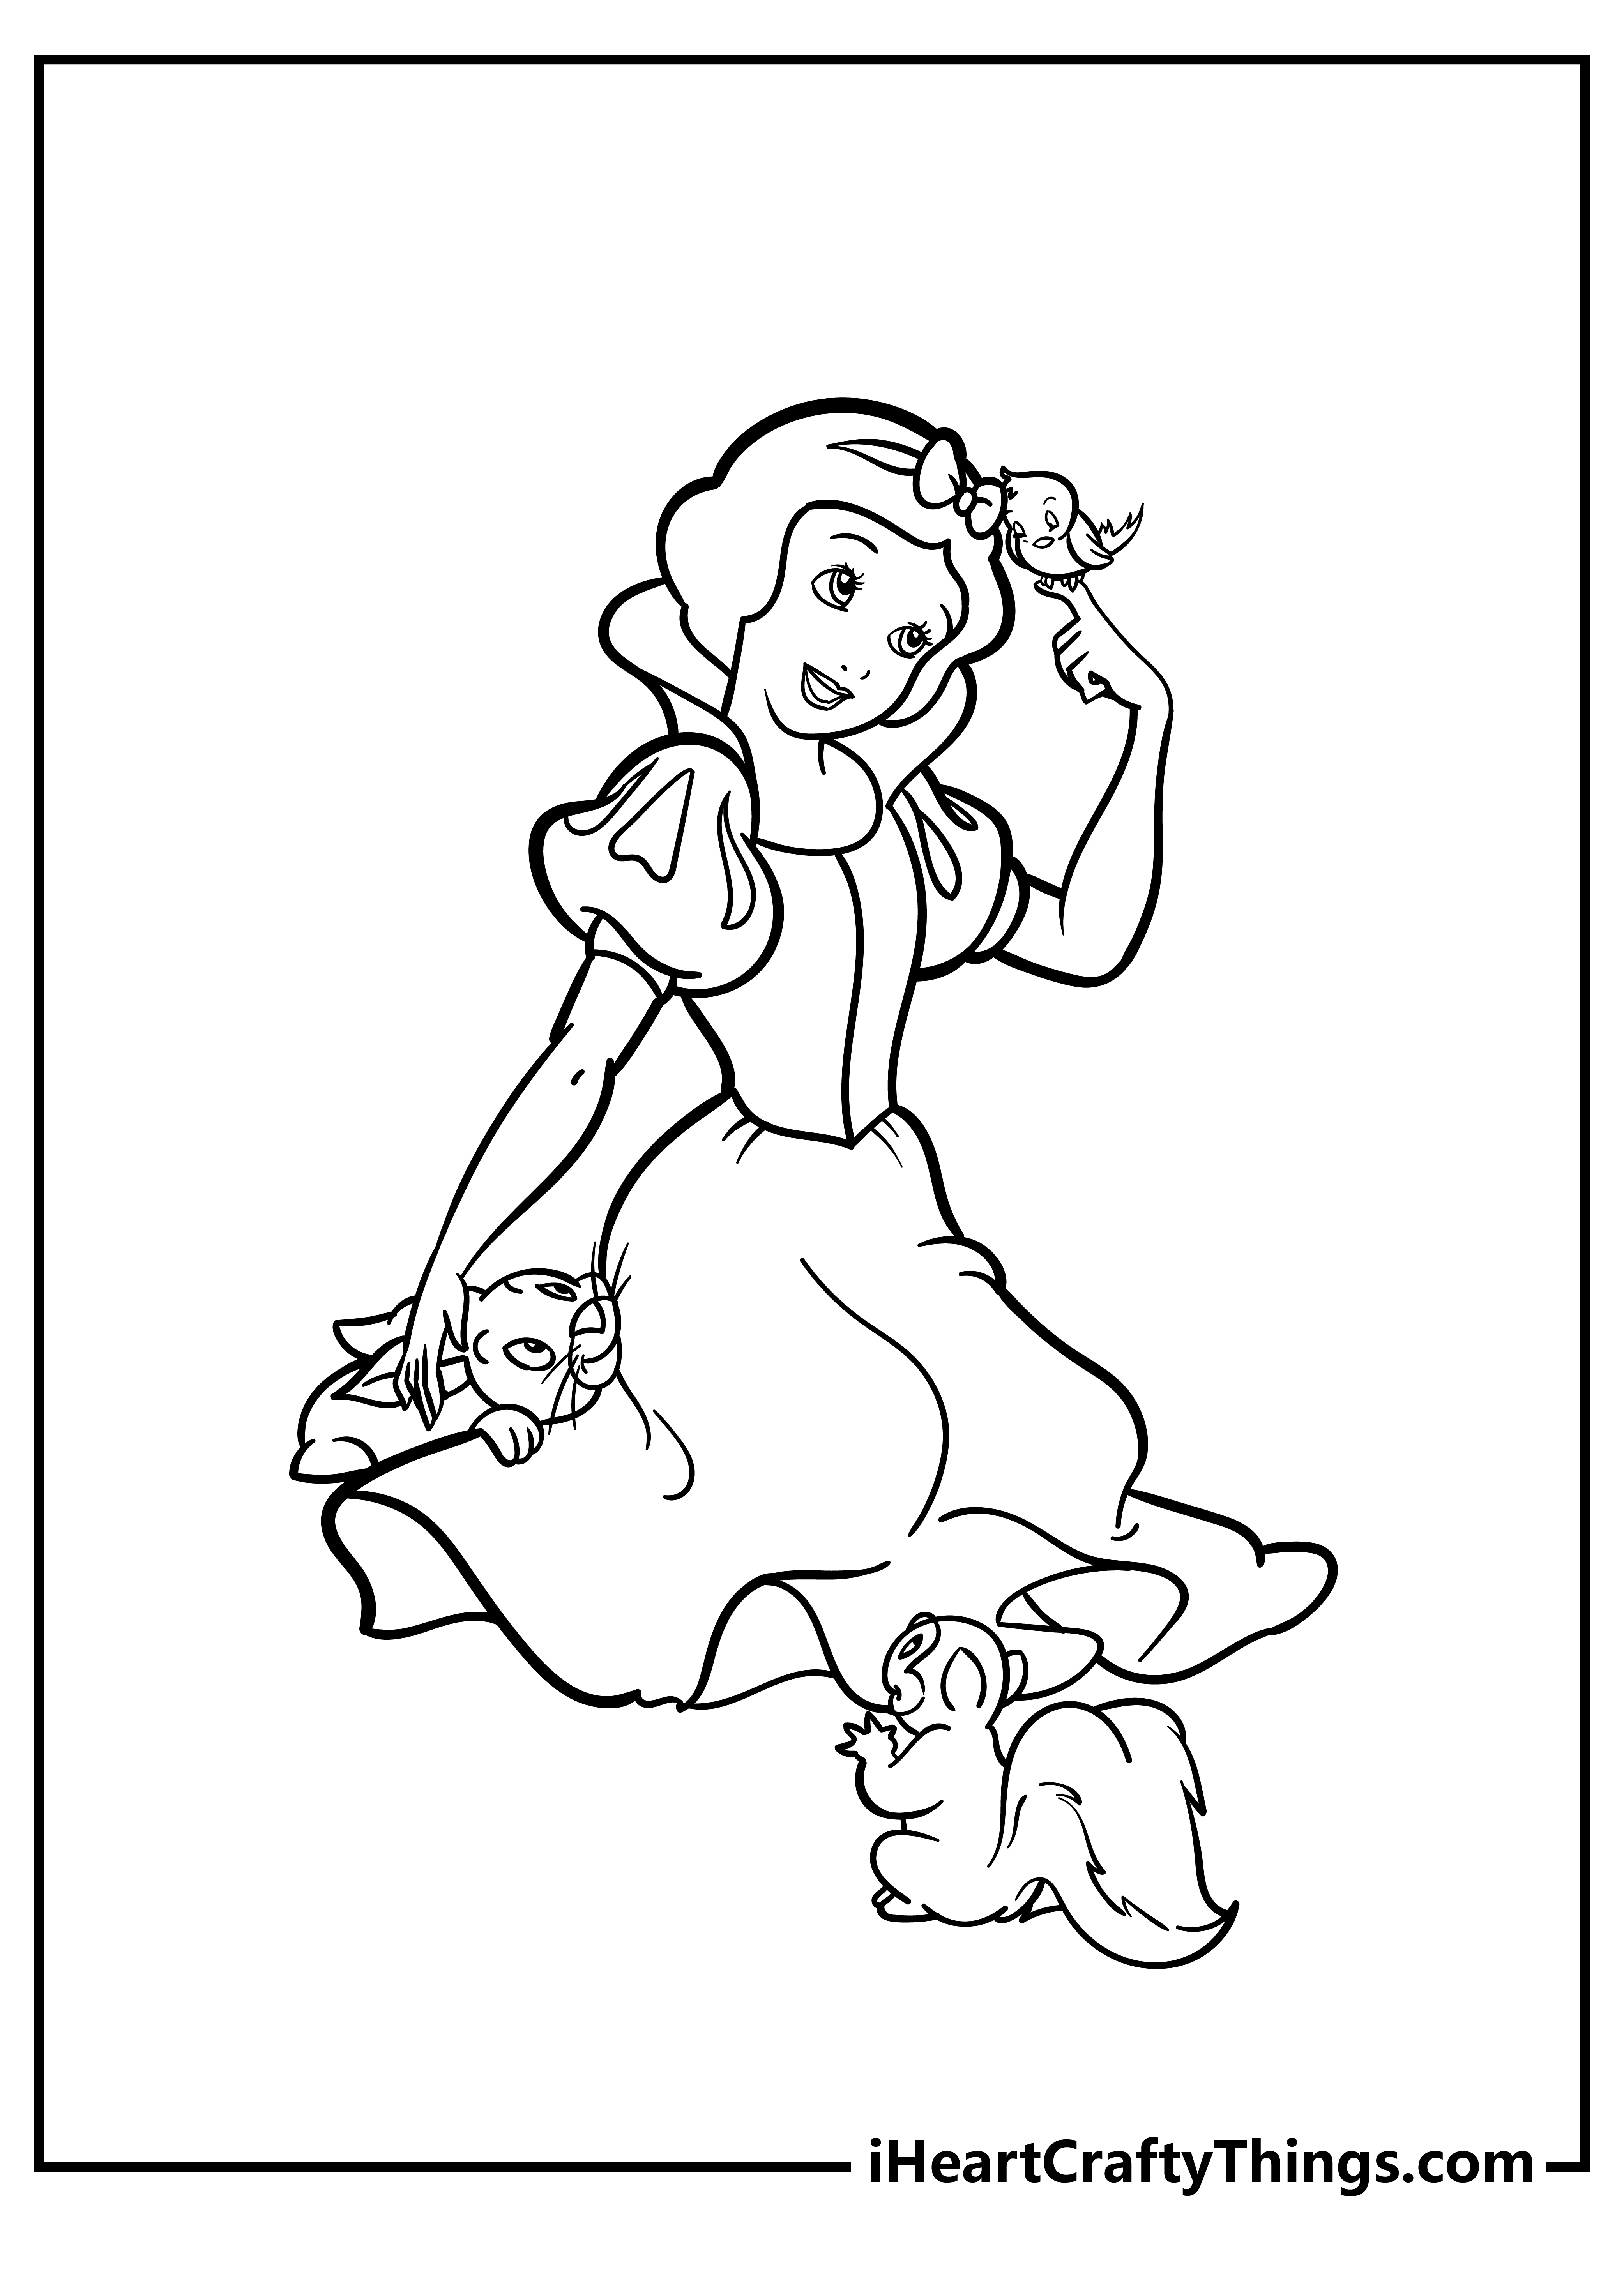 Snow White Coloring Pages for preschoolers free printable